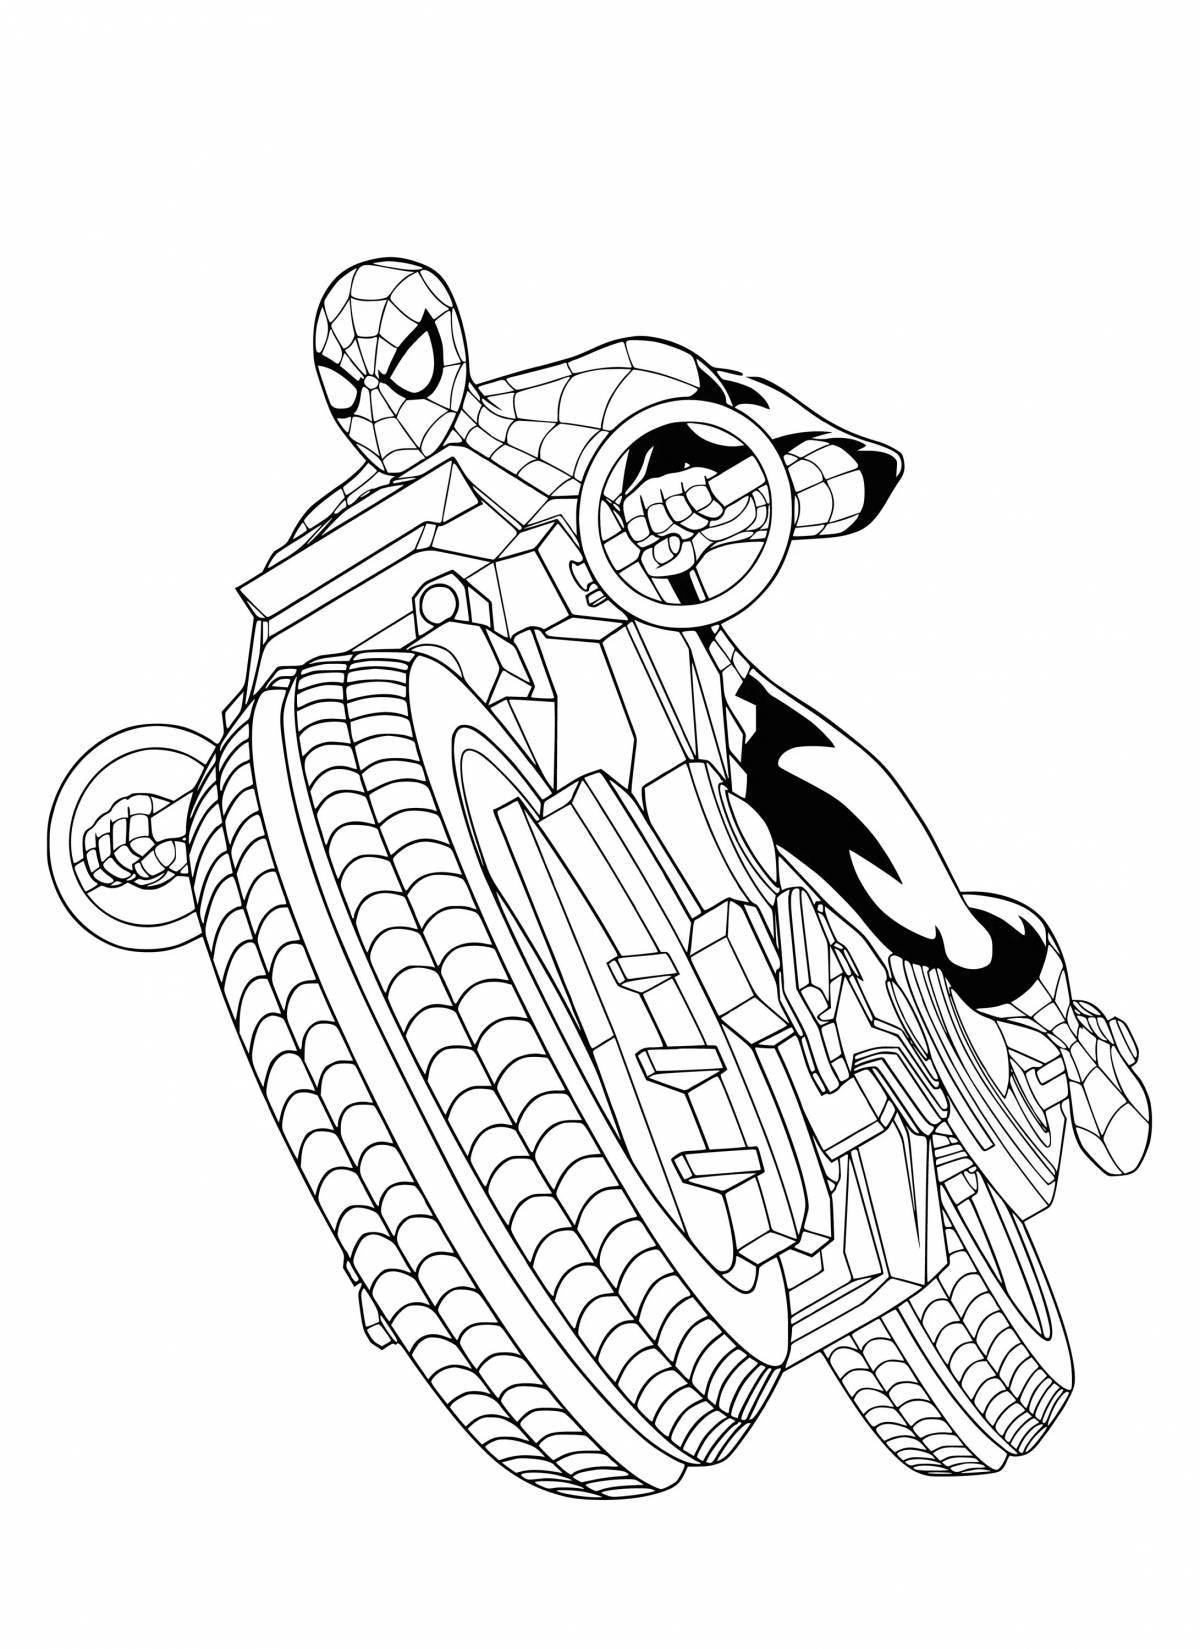 Dazzling spider-man on a motorcycle